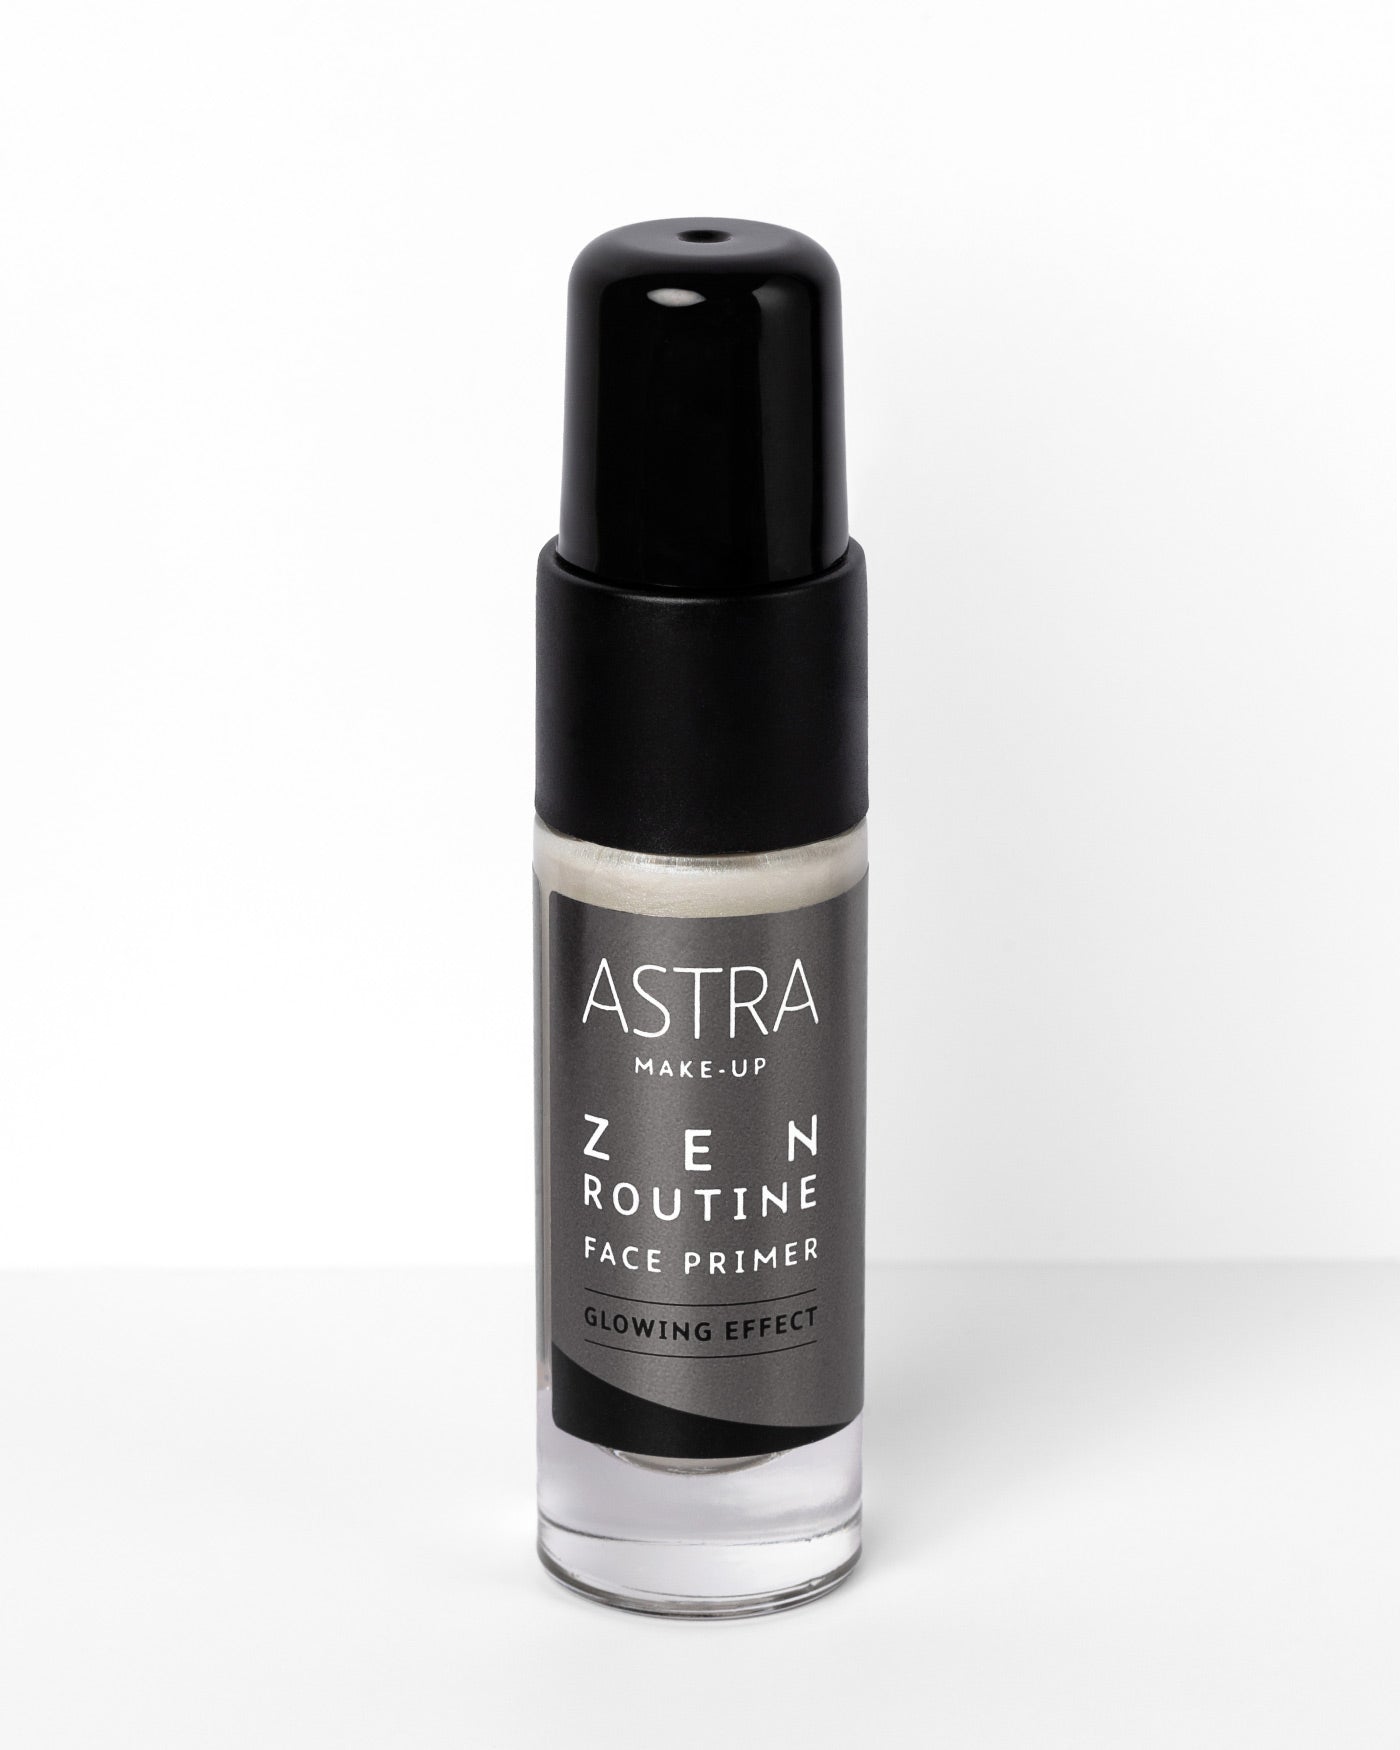 ZEN ROUTINE FACE PRIMER GLOWING EFFECT - Face - Astra Make-Up